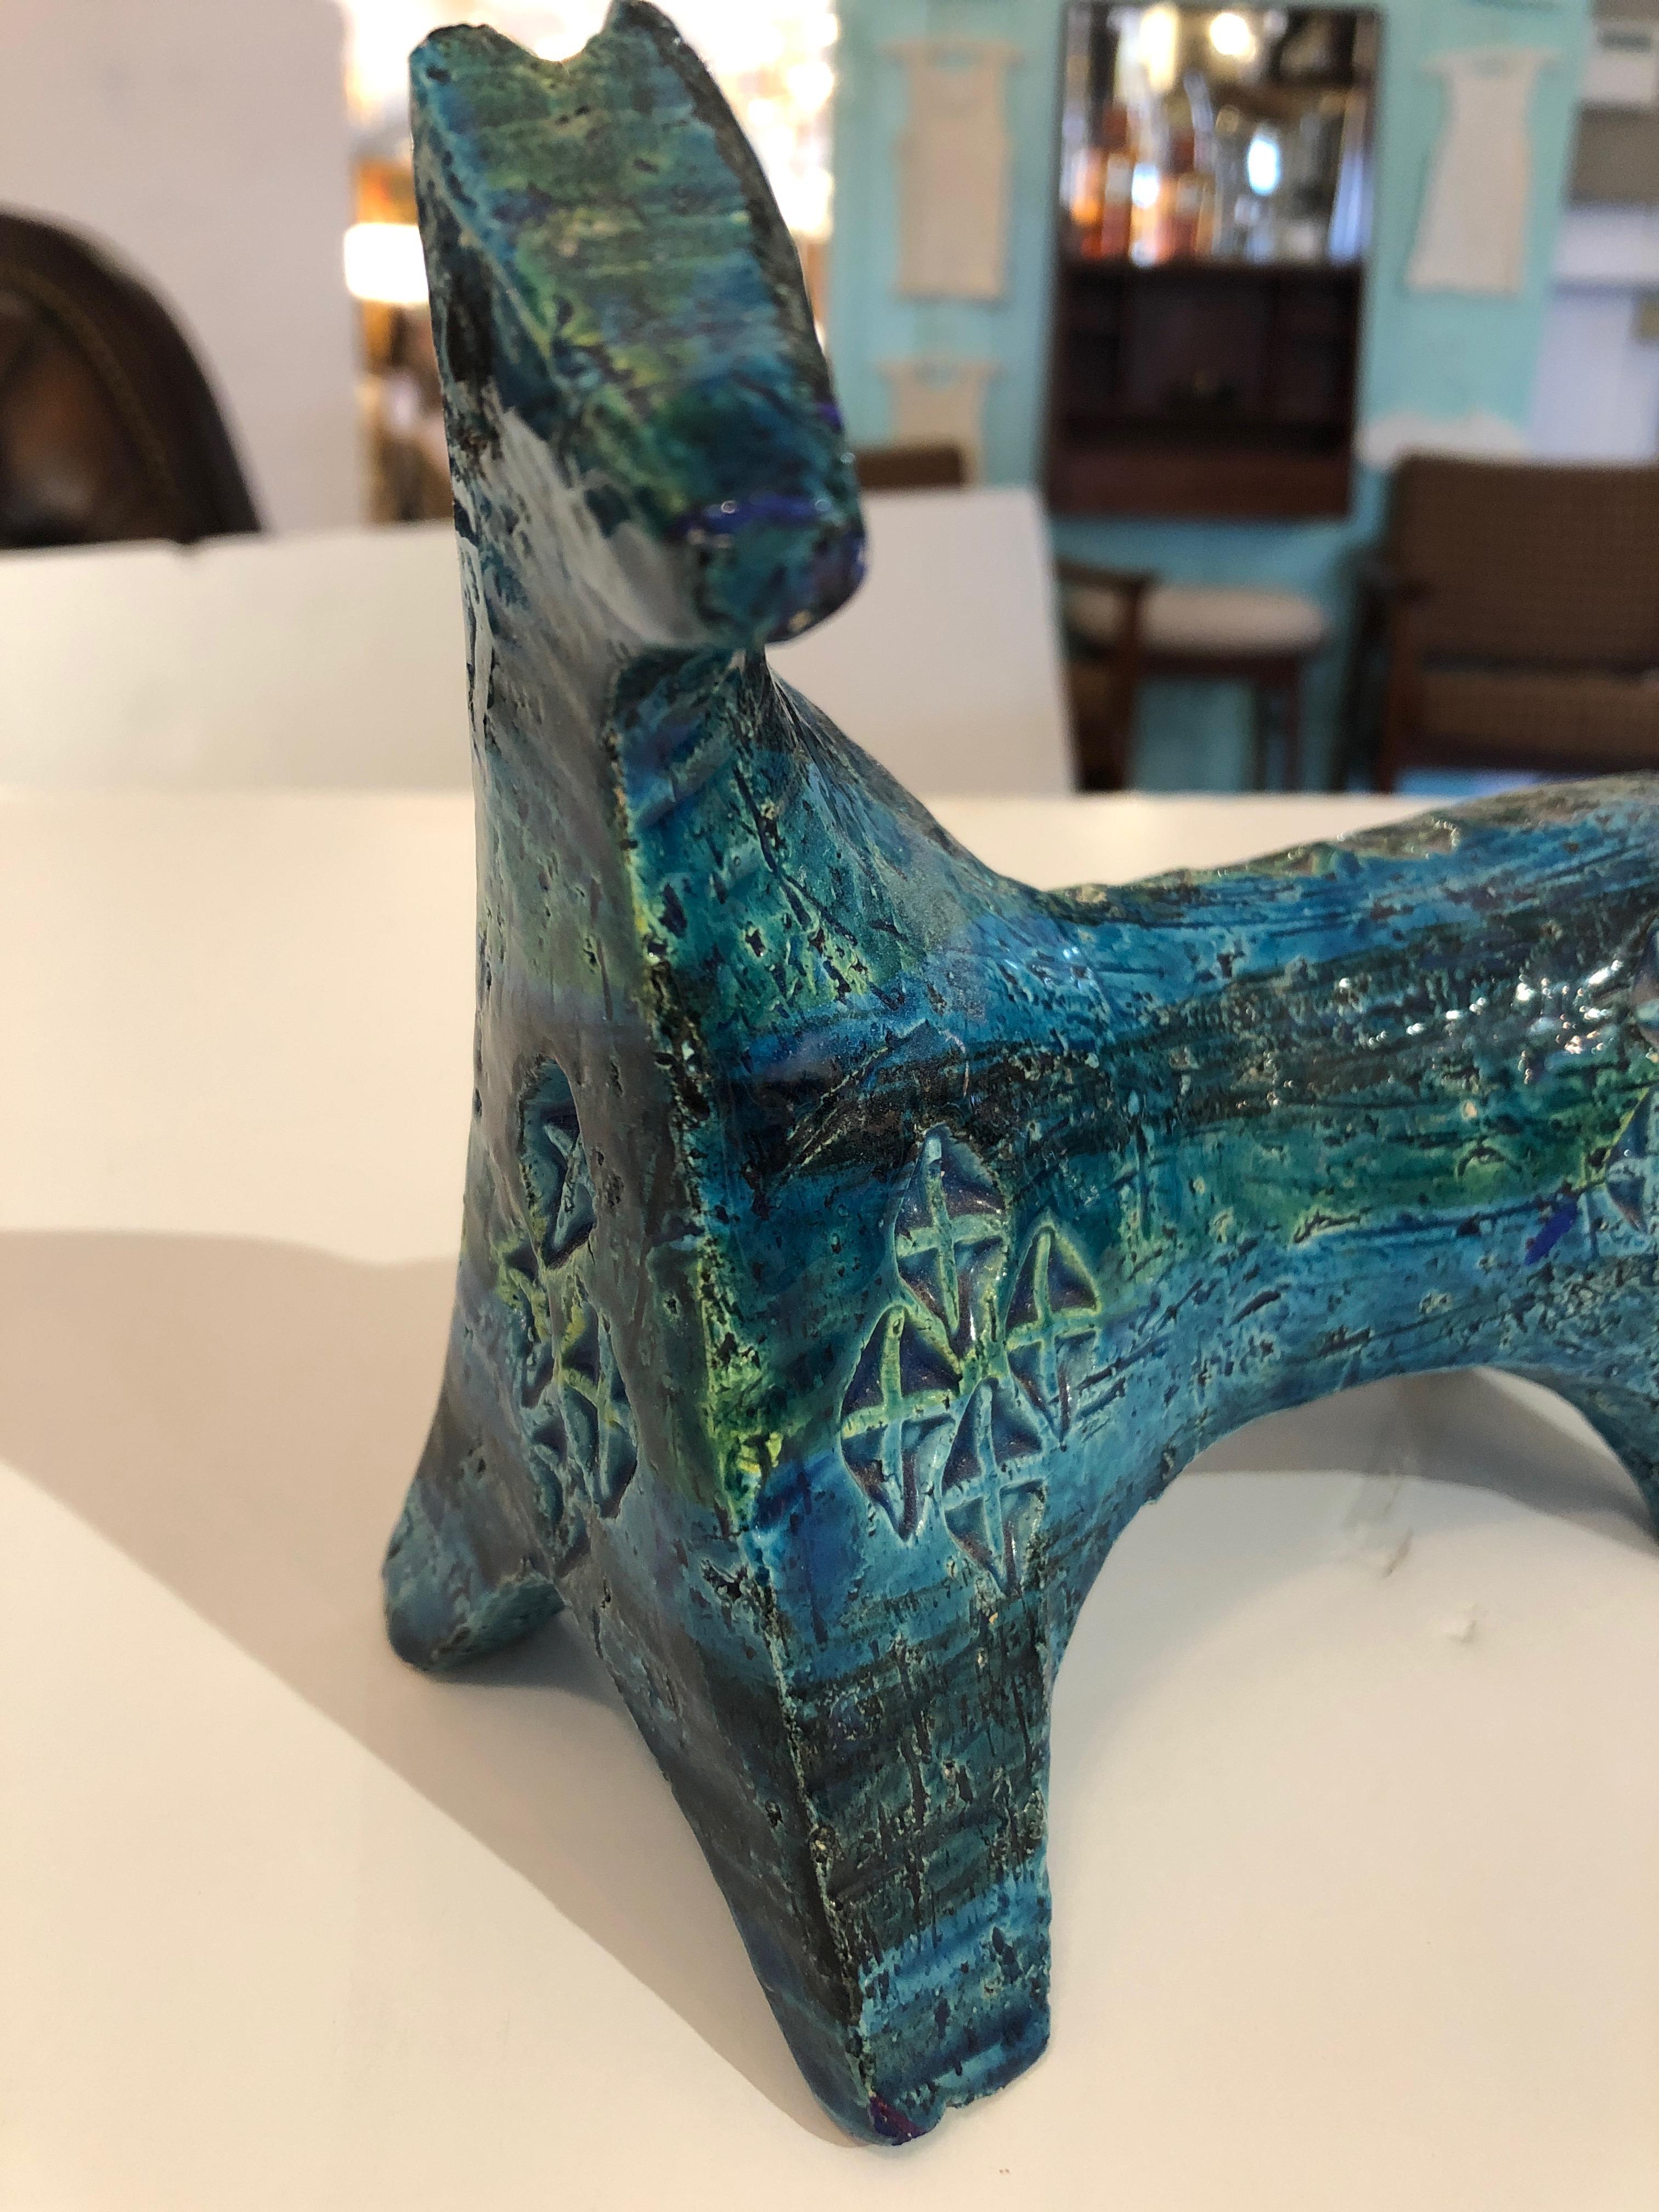 Abstracted form of a horse designed by Aldo Londi in the Blue Rimini style series for Bitossi, Italy.
Wonderful turquoise and green coloration and geometric decoration.